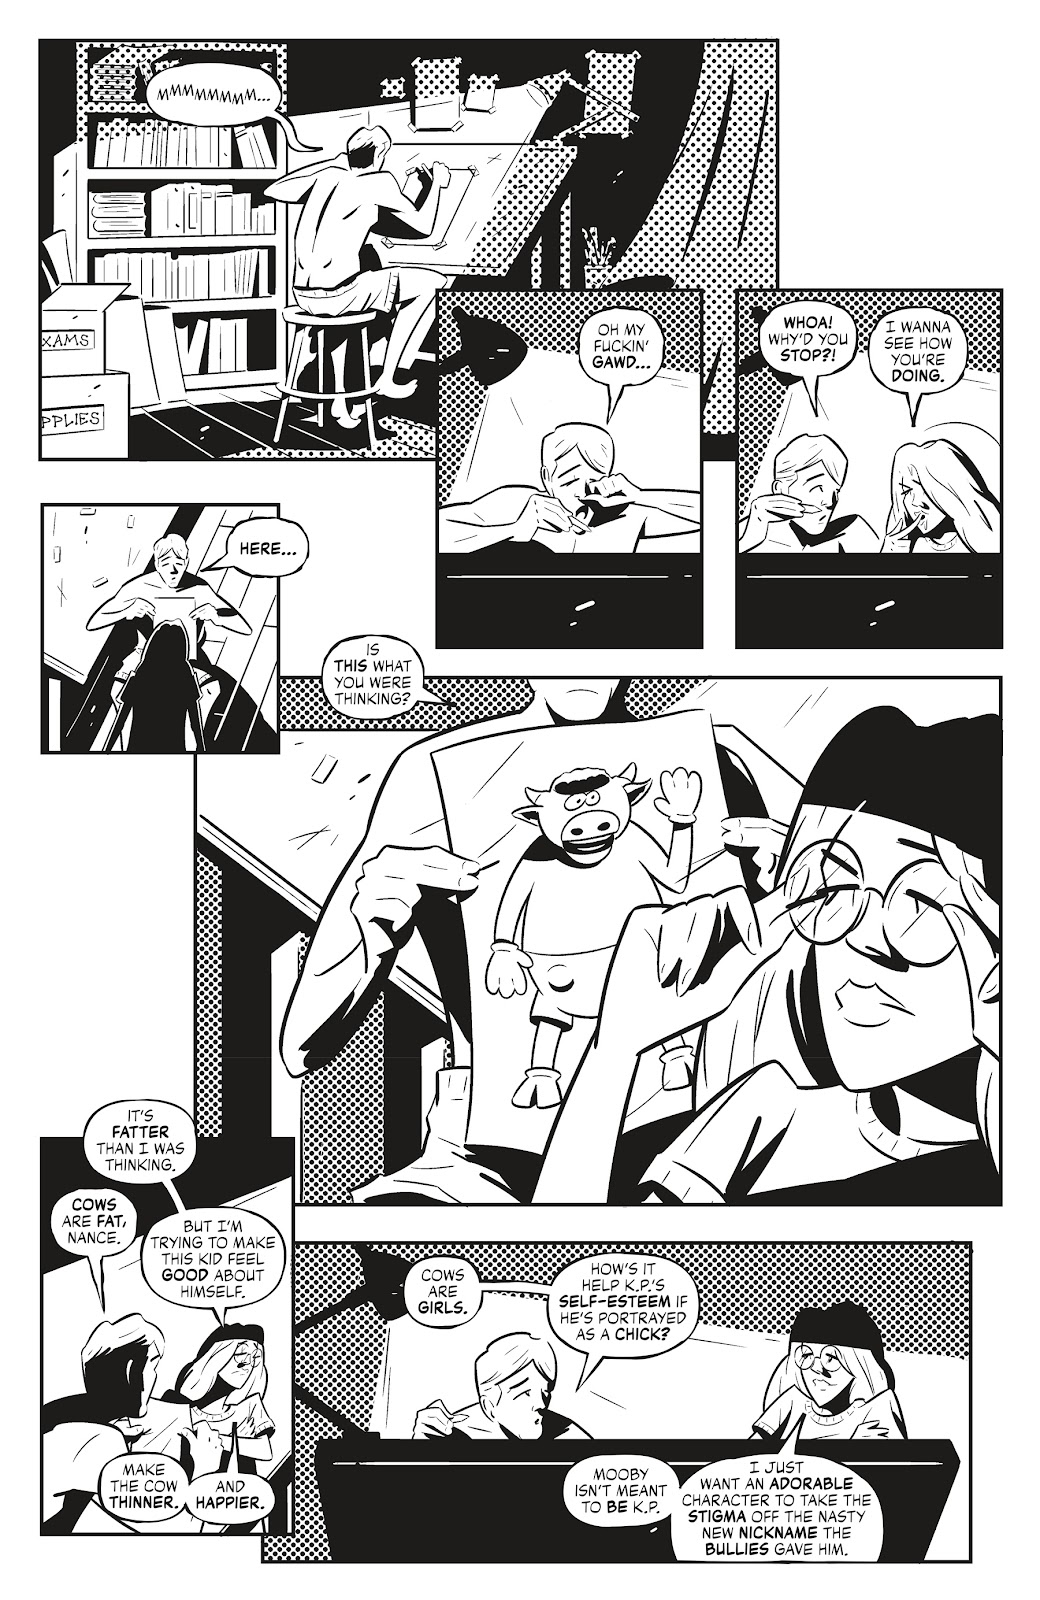 Quick Stops Vol. 2 issue 1 - Page 9